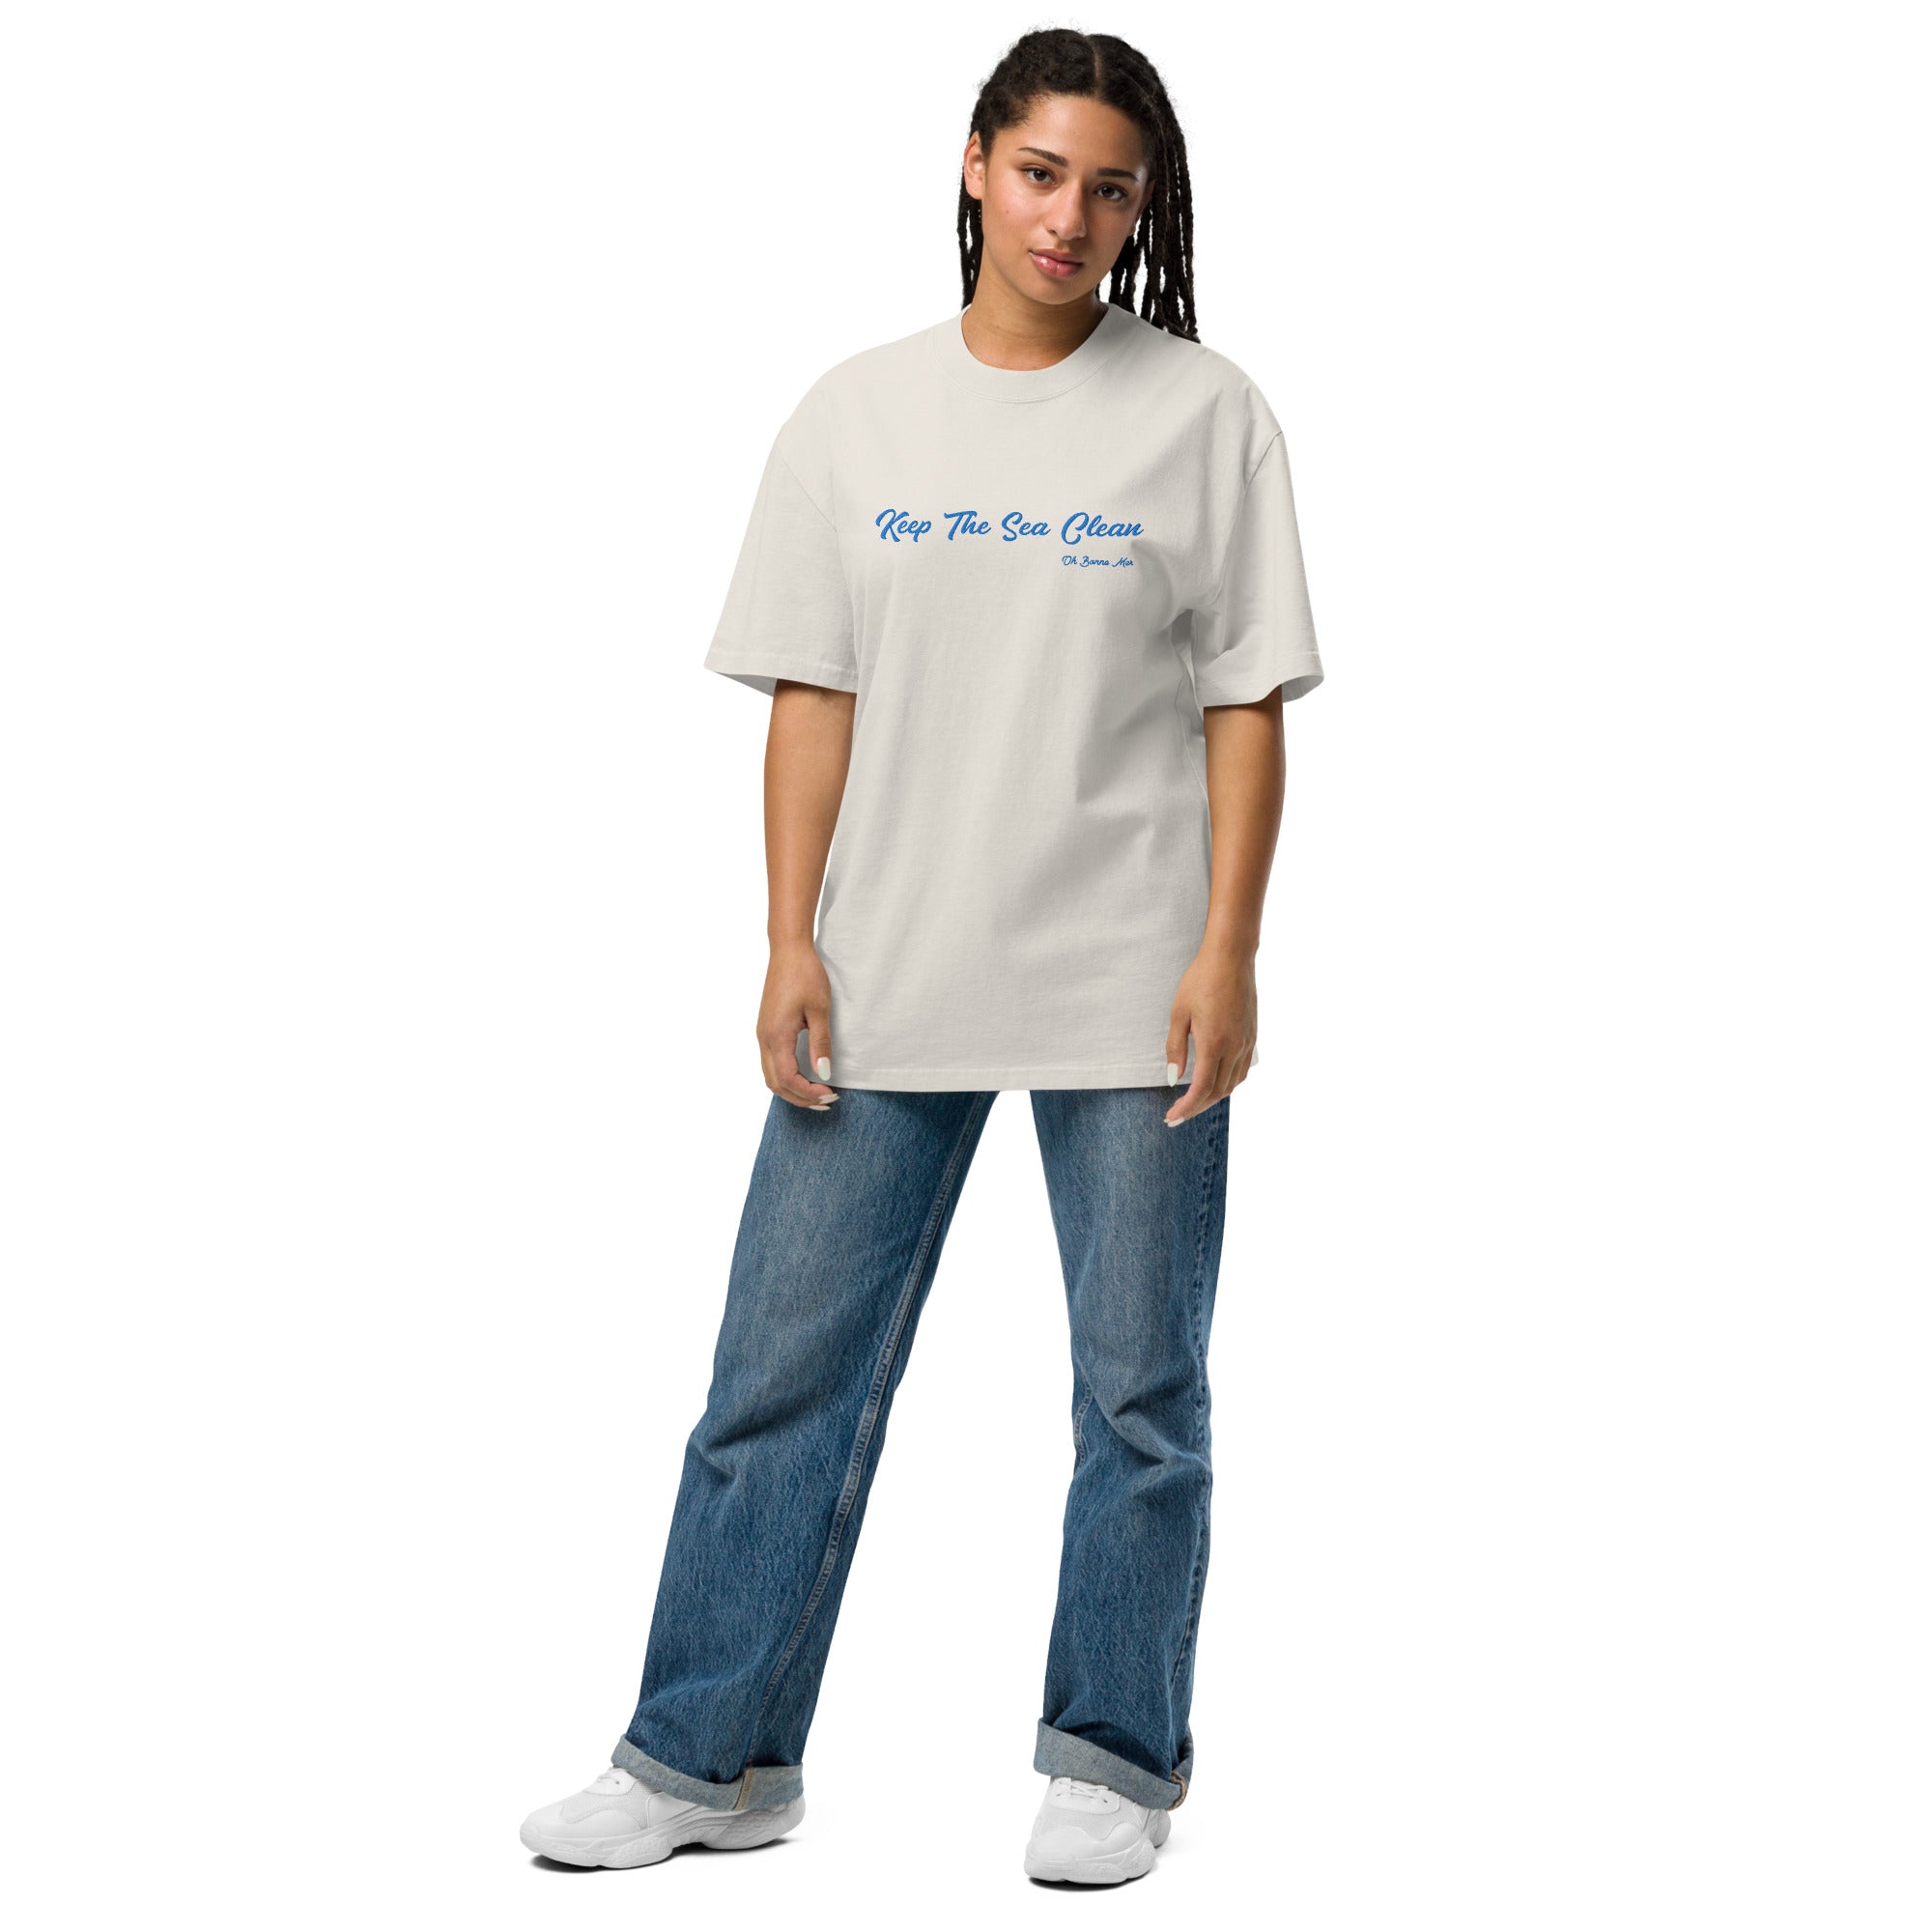 Oversized heavy blend cotton t-shirt Keep The Sea Clean blue avio embroidered pattern